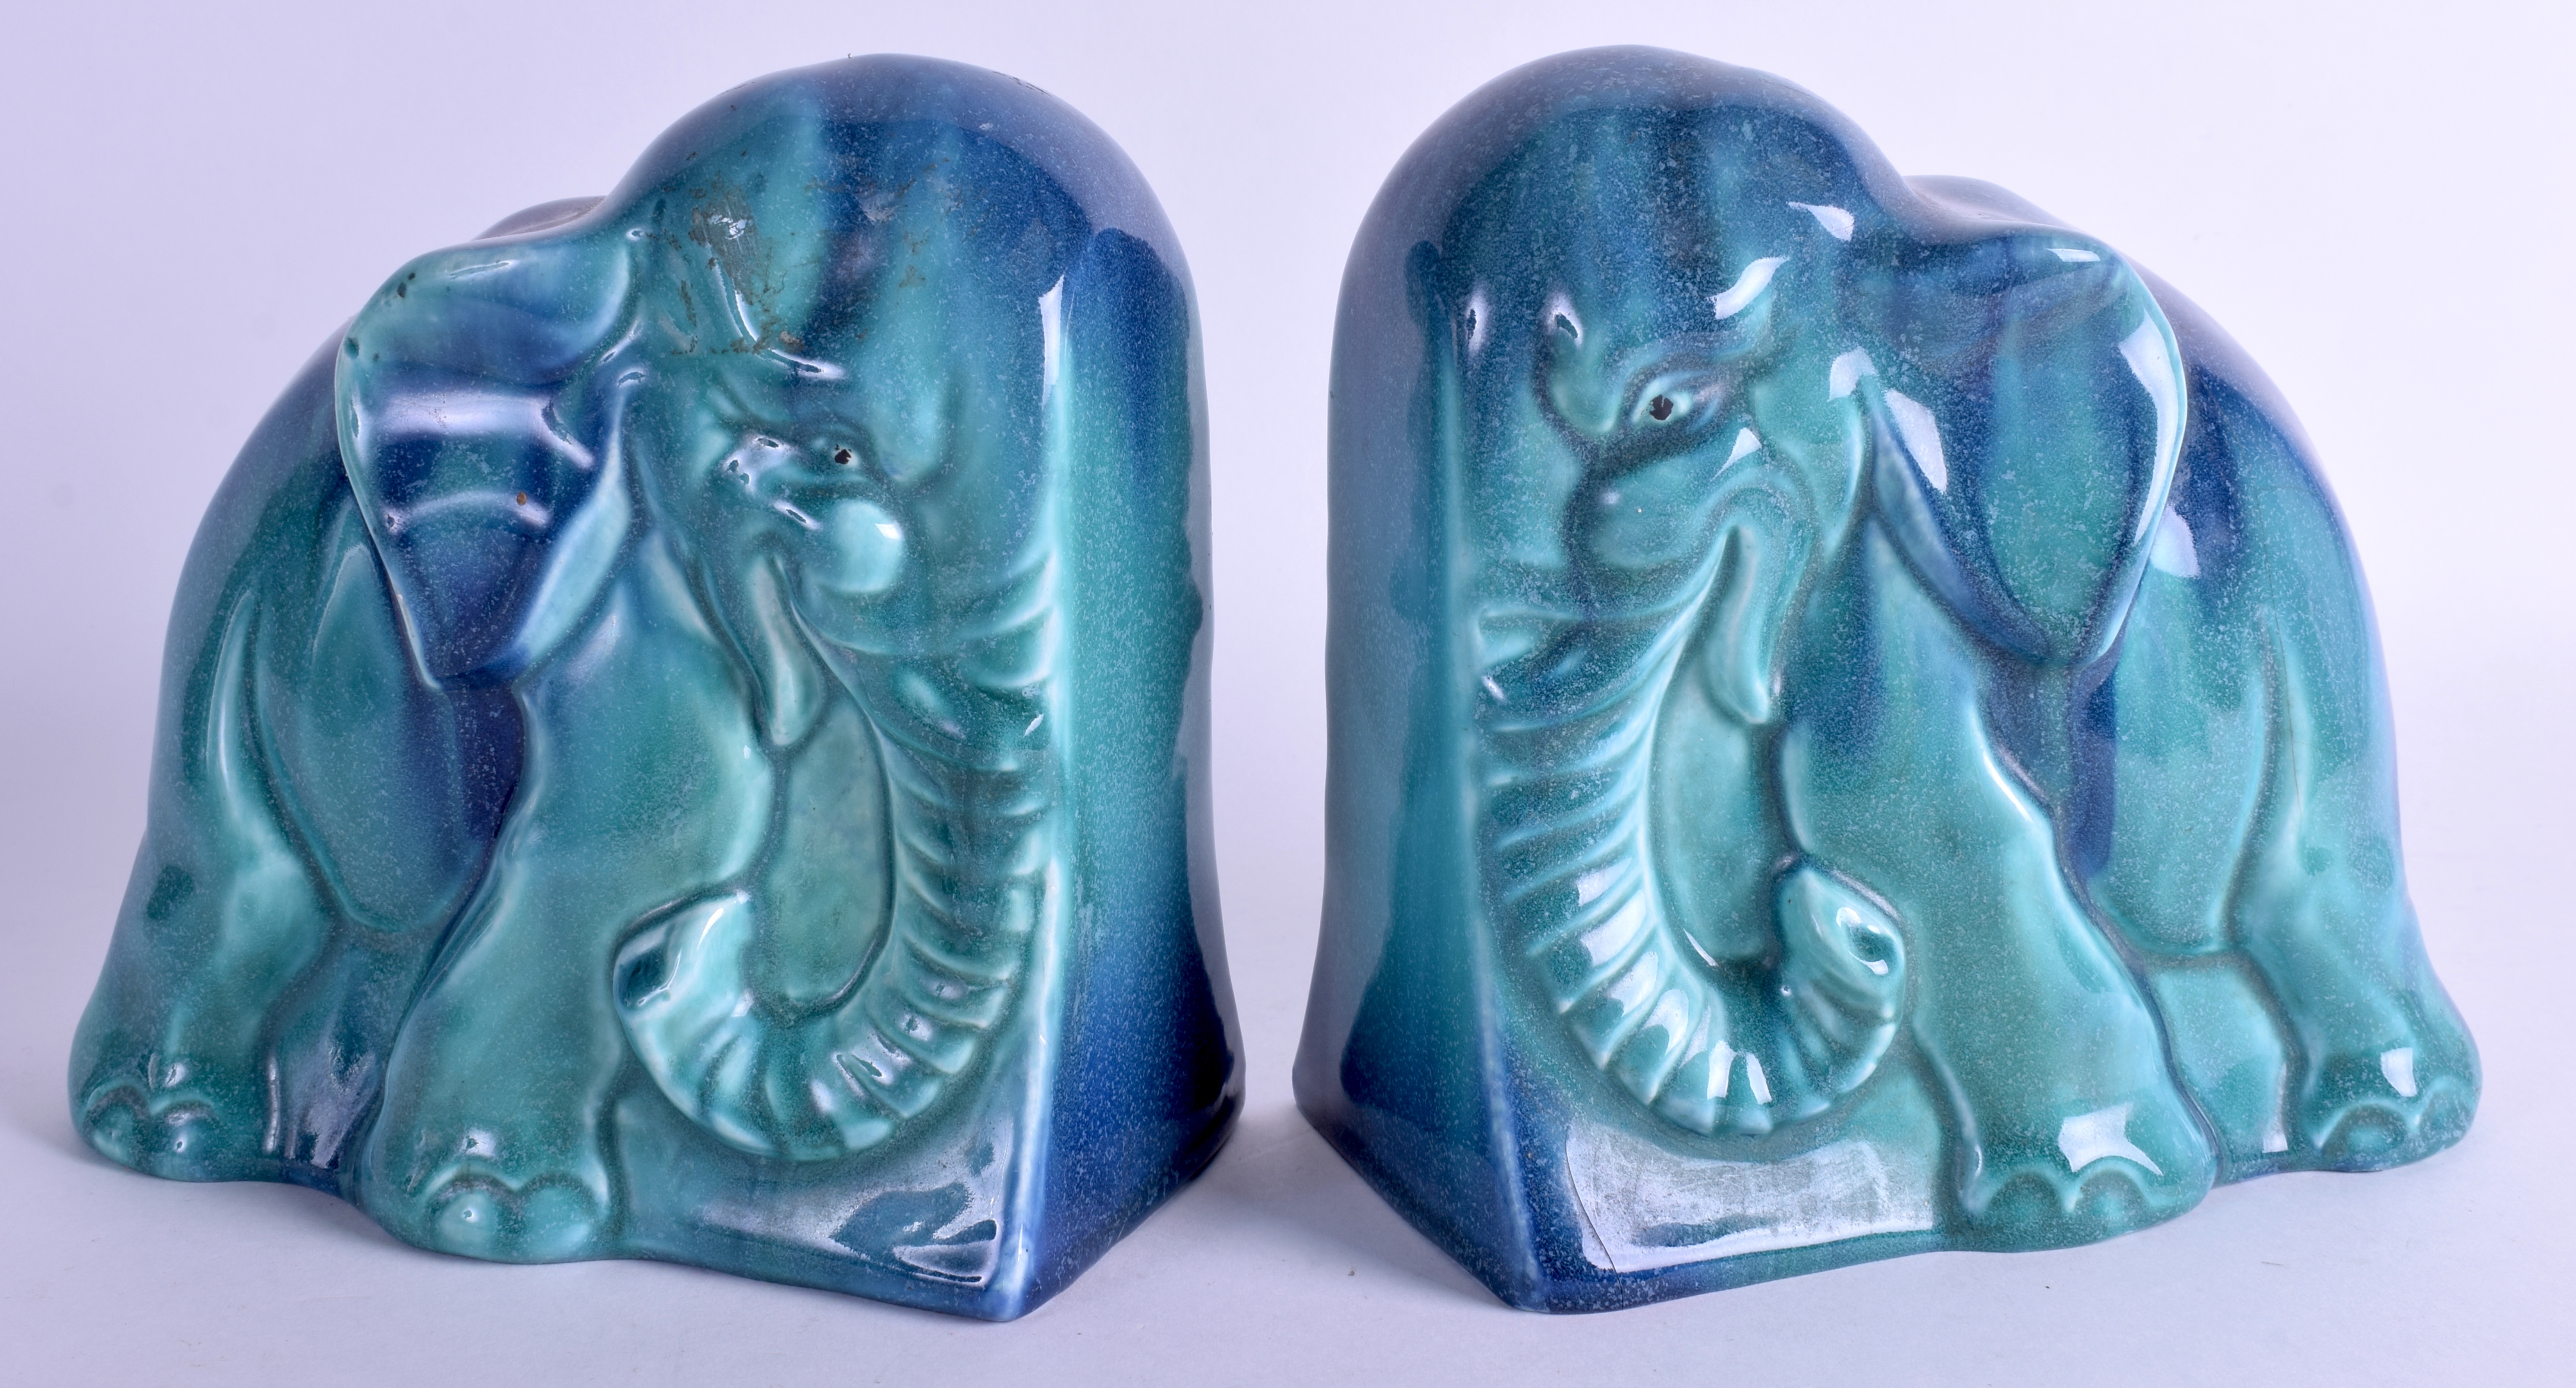 AN UNUSUAL PAIR OF 1950S CONTINENTAL BLUE GLAZED FLAMBE POTTERY BOOKENDS in the form of elephants.